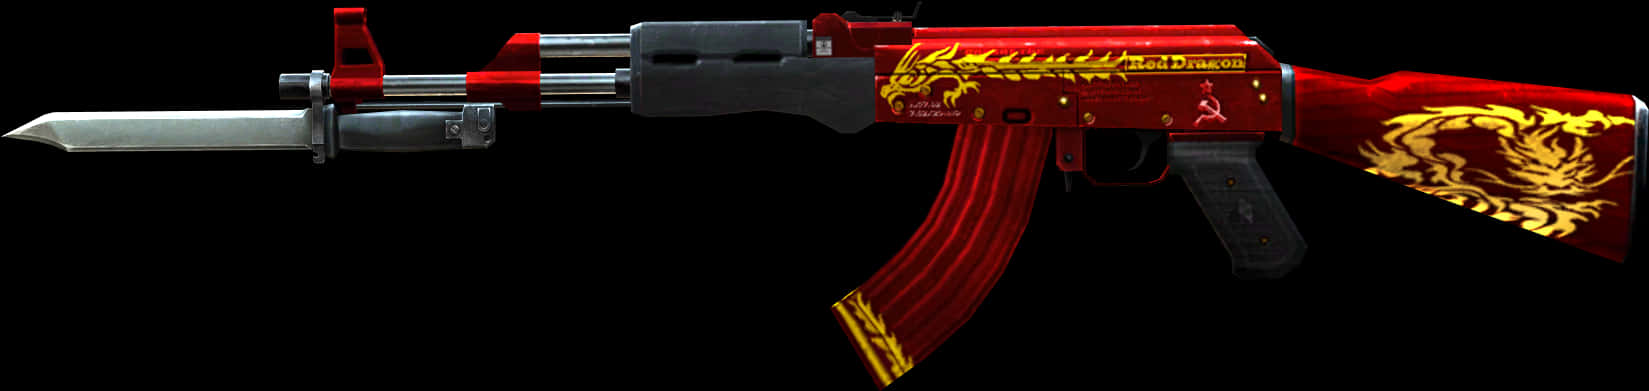 A Gun With A Red And Yellow Design